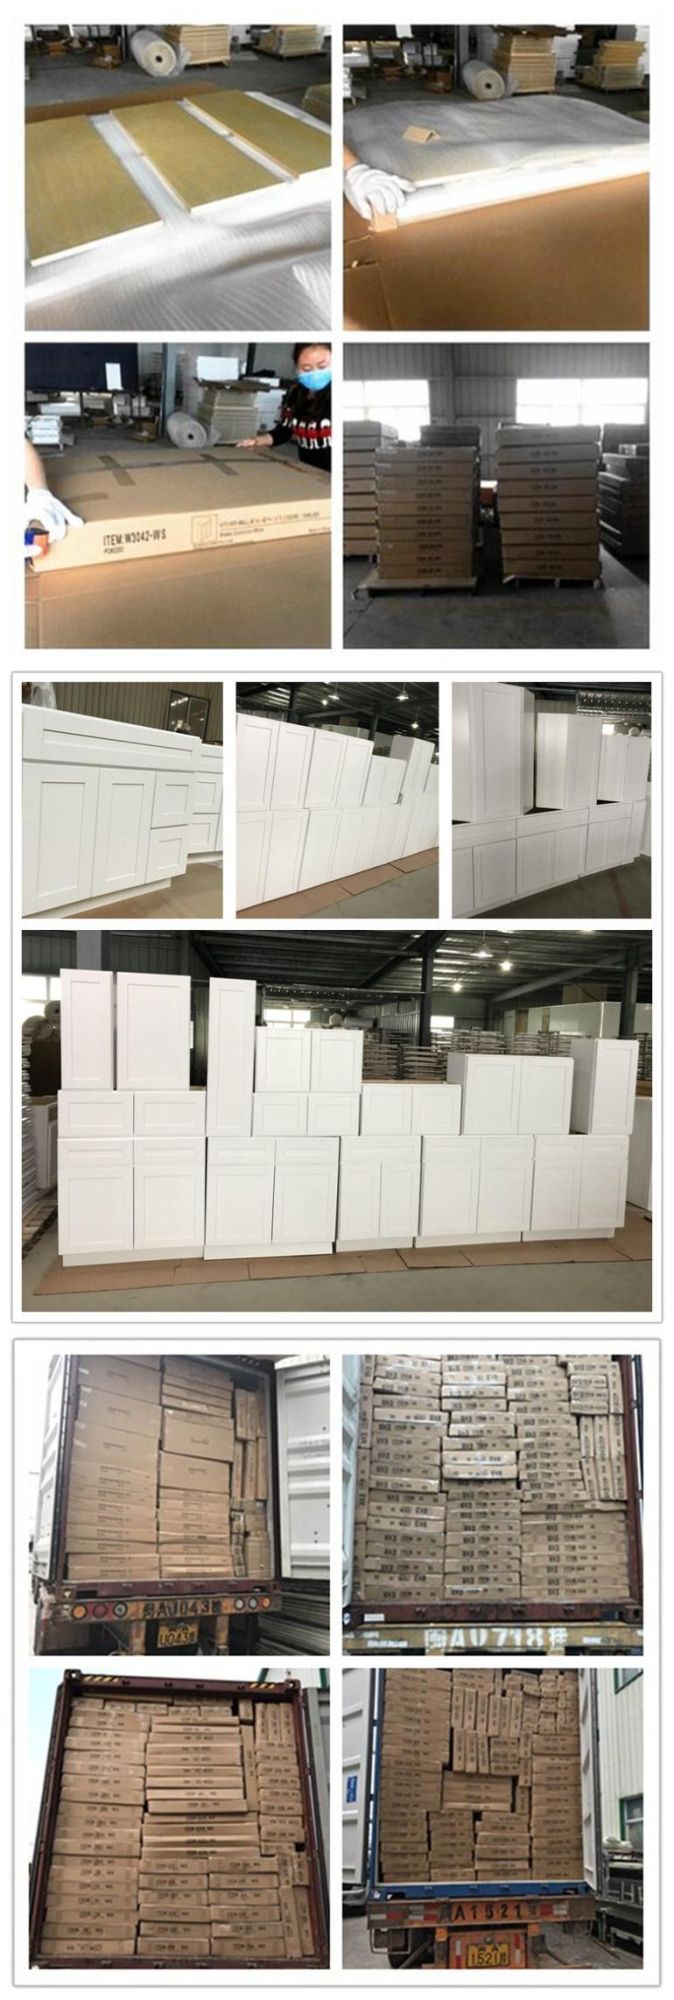 Hot Selling Modular Kitchen Cabinets Door for Wholesale